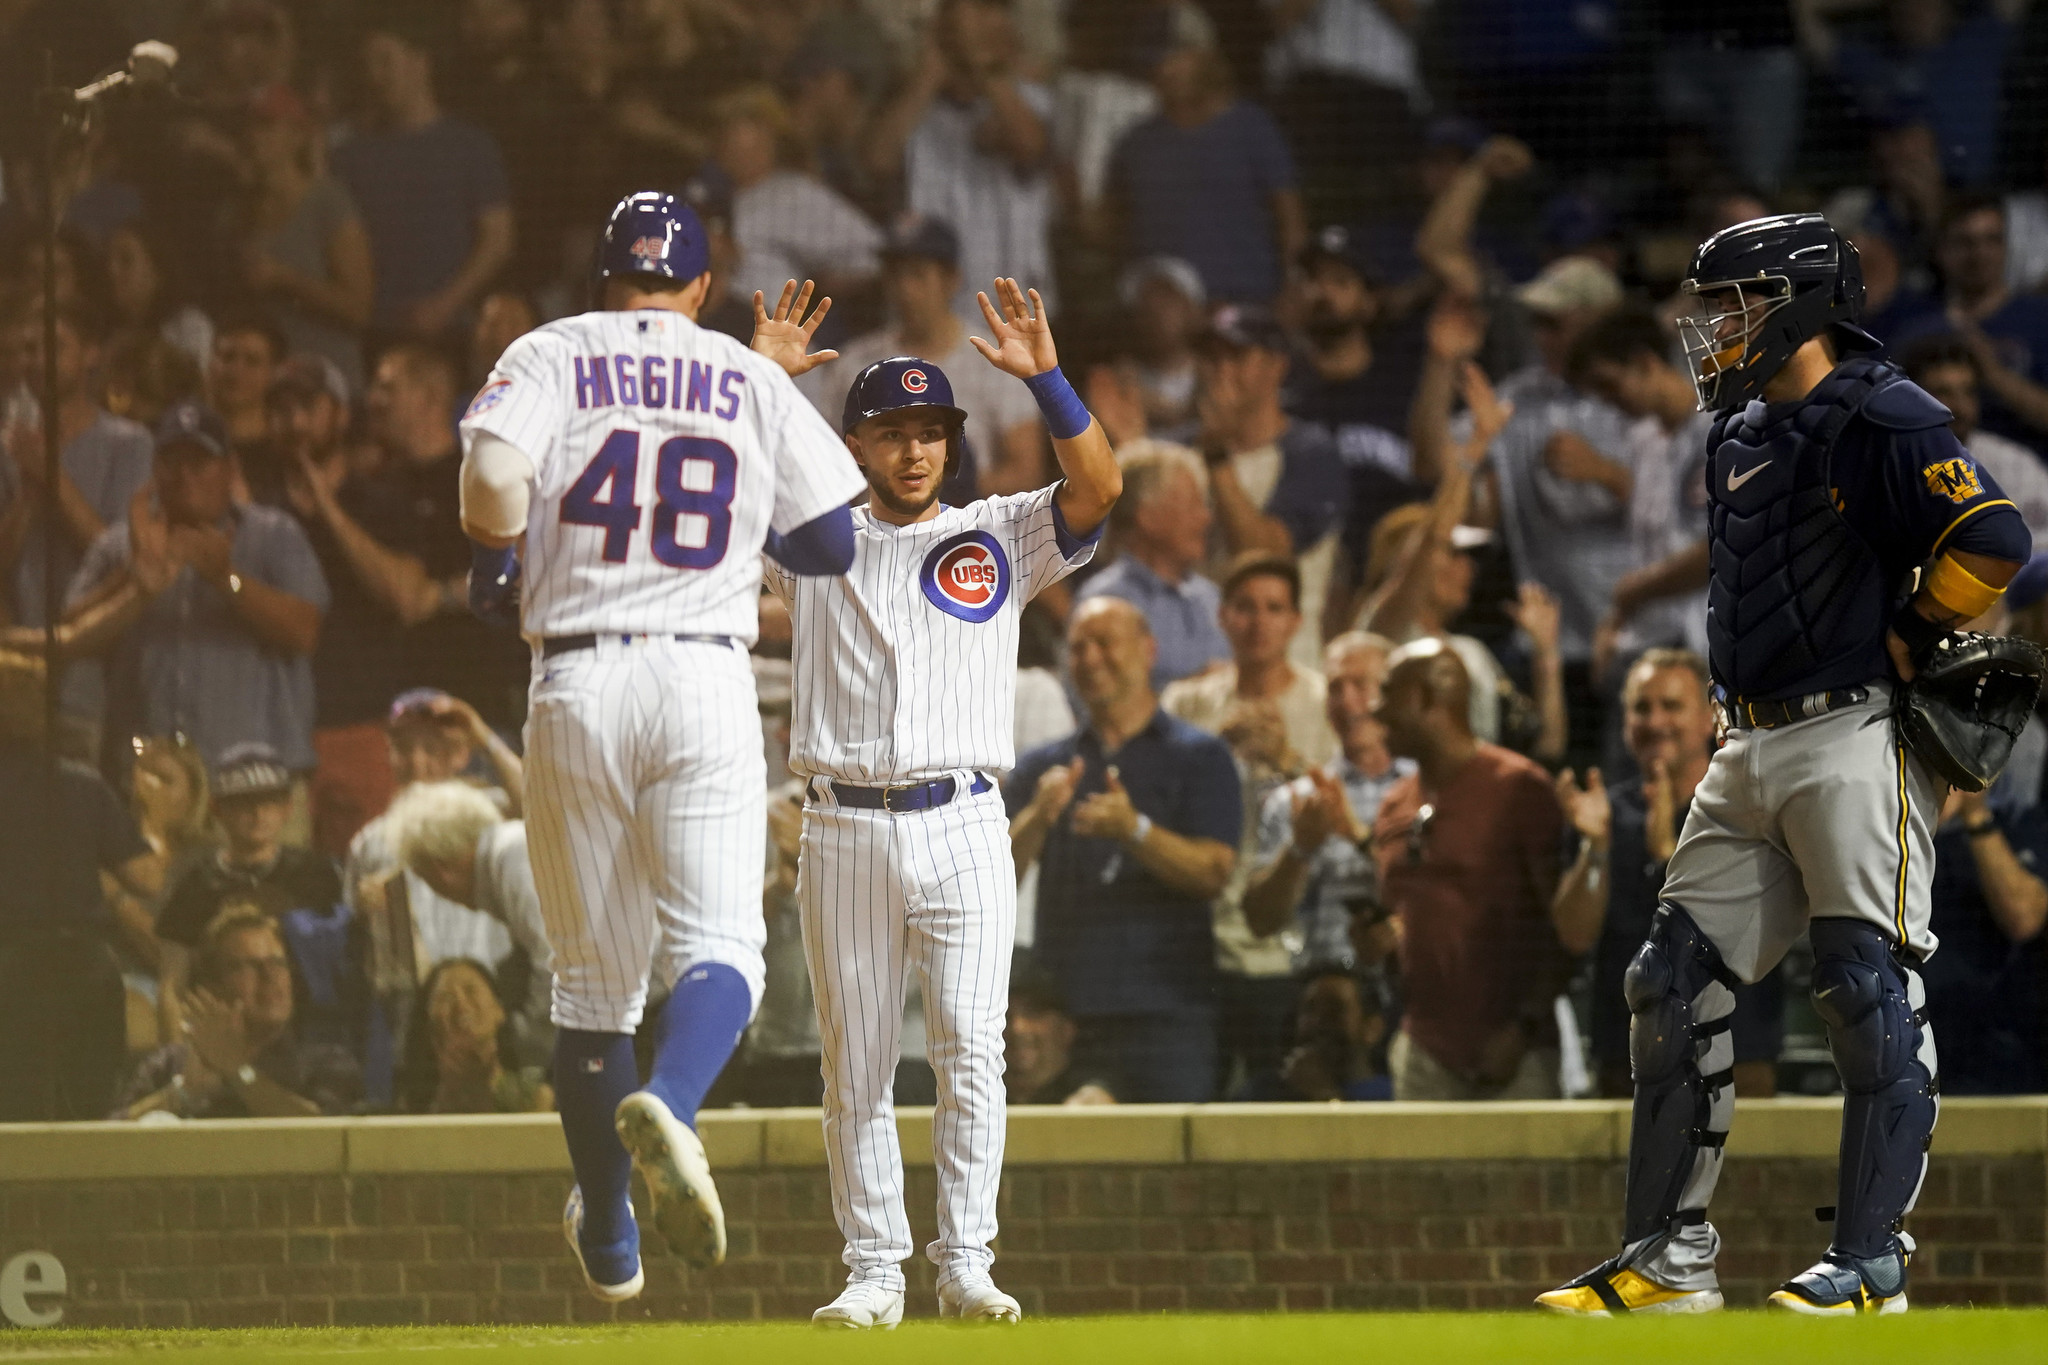 Wisdom homers in 8th inning, Cubs beat Brewers 8-7